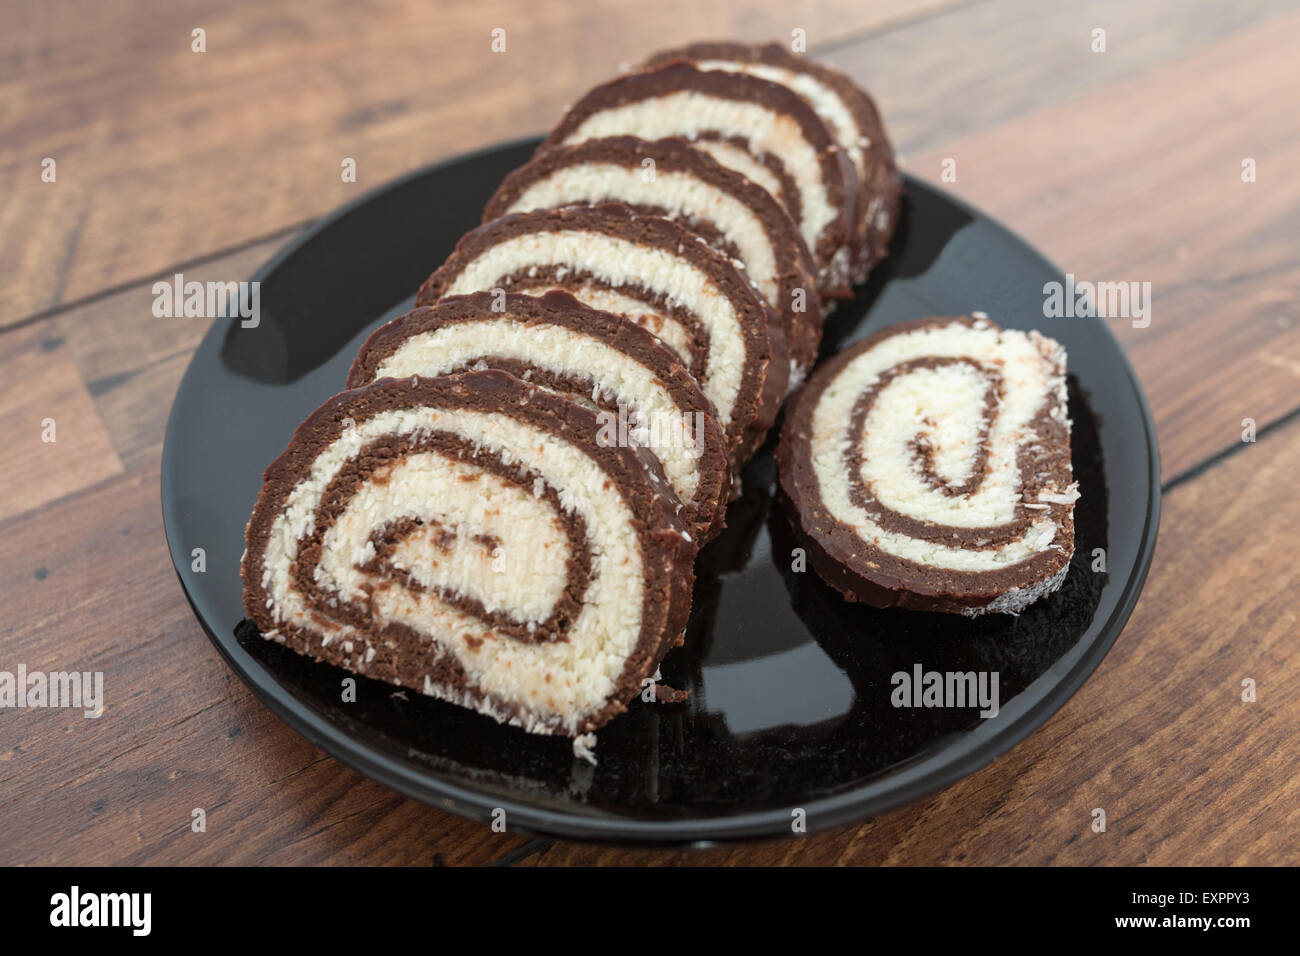 Coconut and Chocolate Rolls Stock Photo